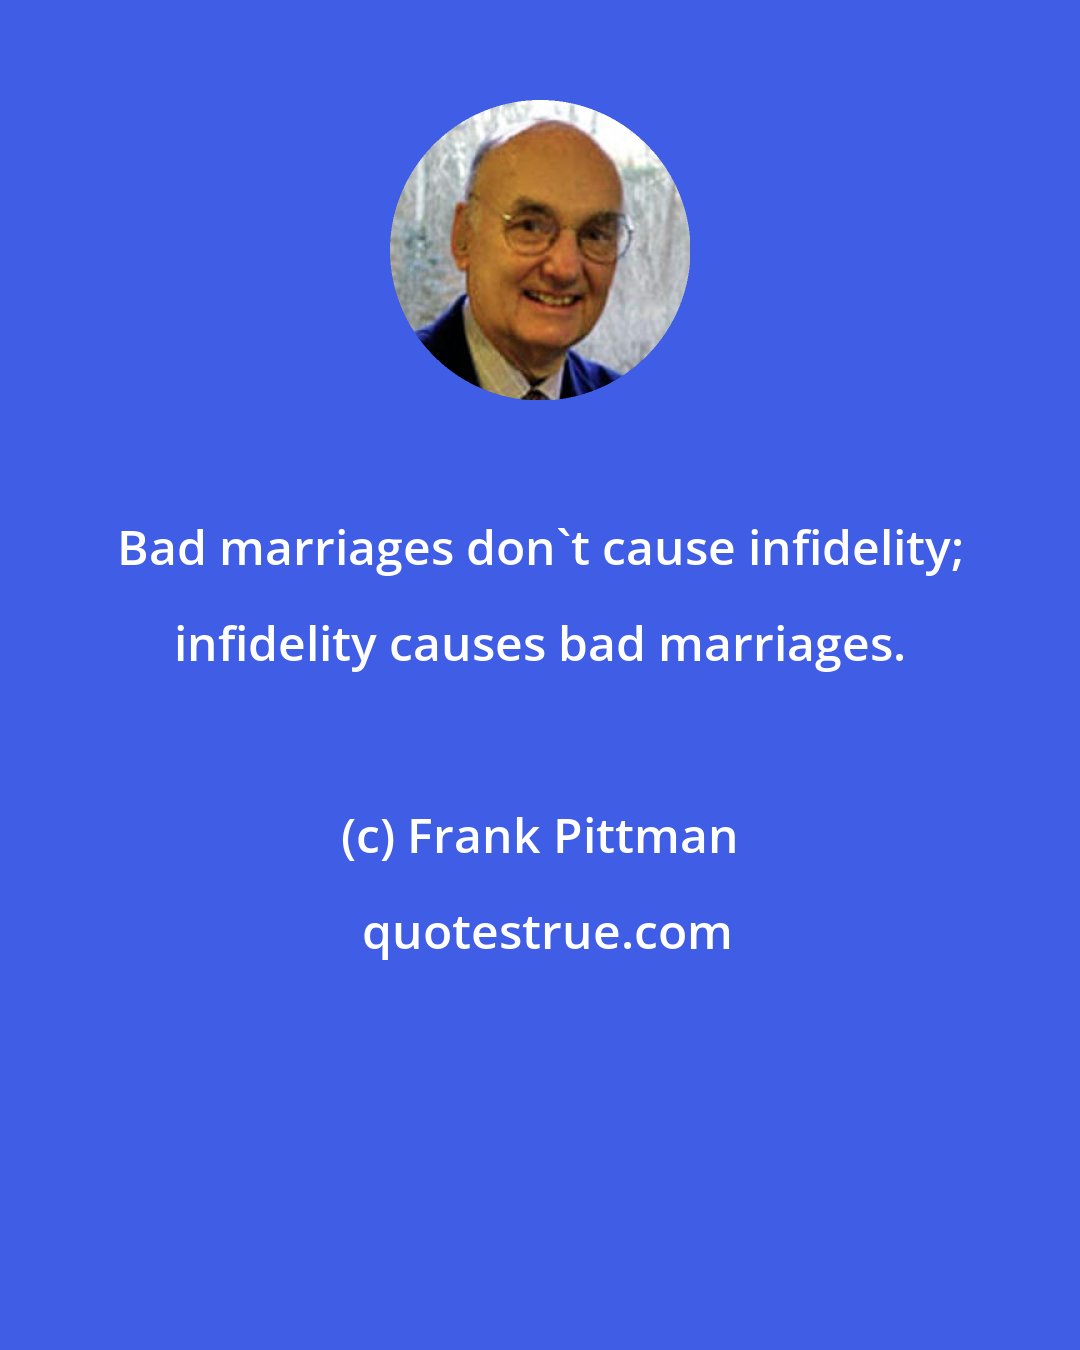 Frank Pittman: Bad marriages don't cause infidelity; infidelity causes bad marriages.